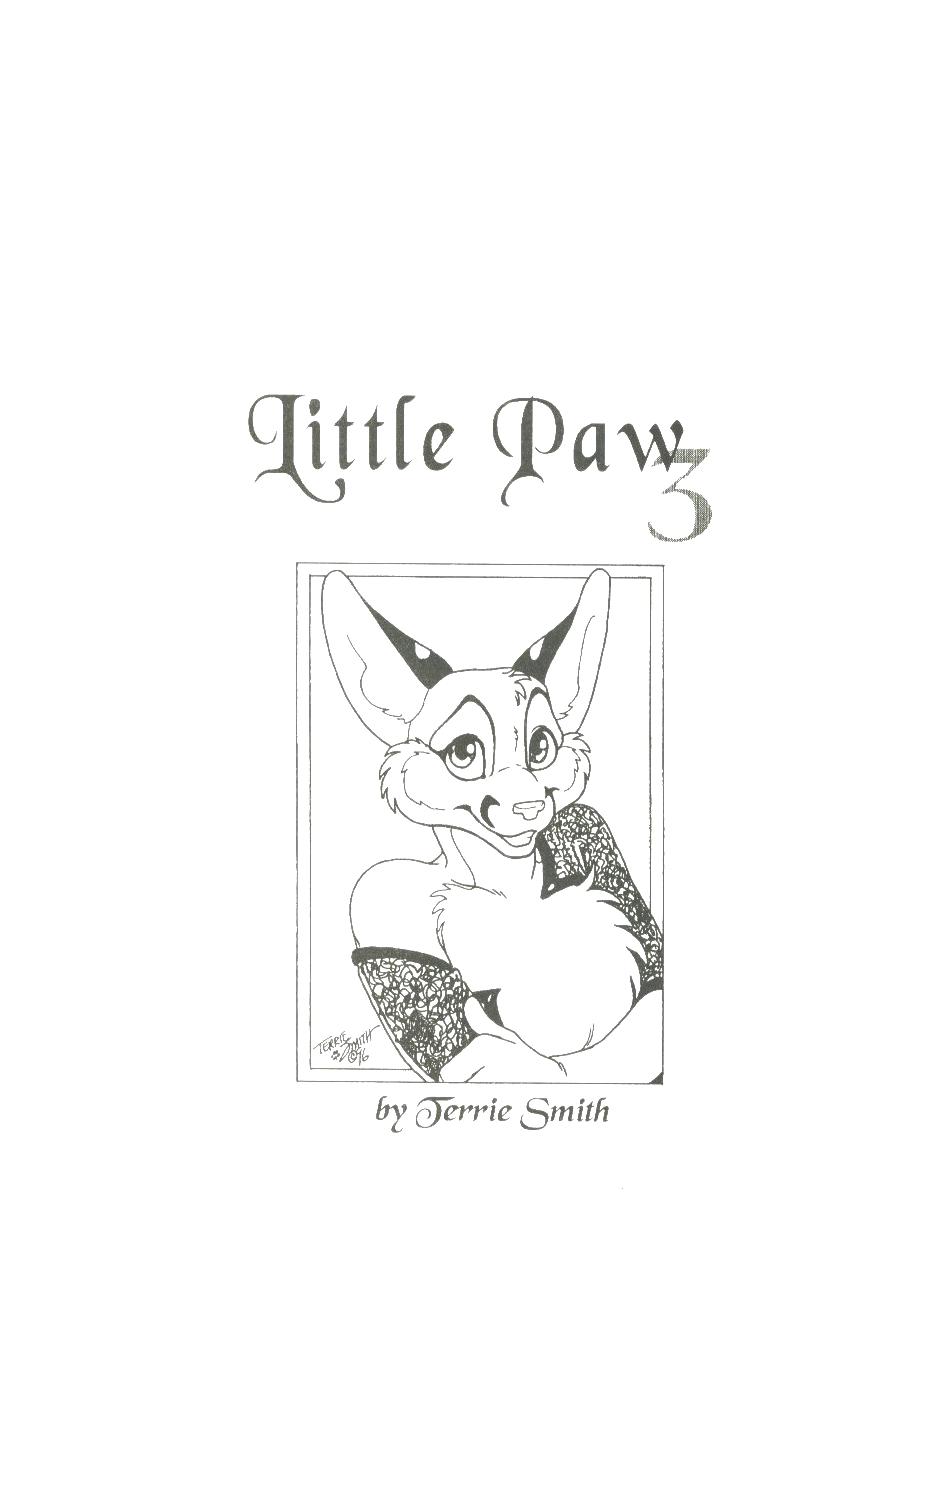 [Terrie Smith] Little Paw #3 